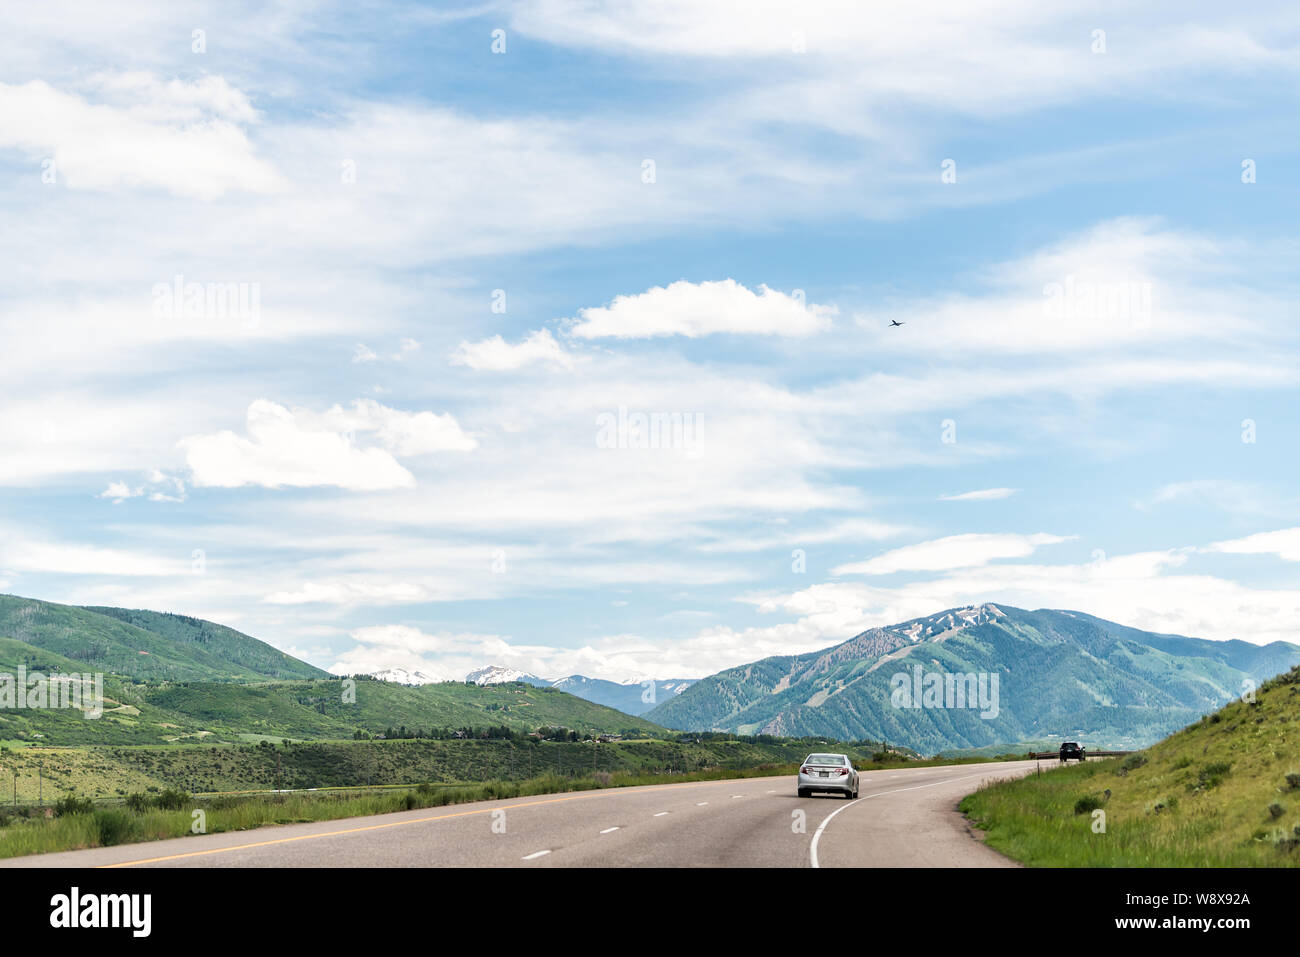 Basalt, USA - June 29, 2019: Road highway 82 to Aspen, Colorado town with cars in traffic and mountain range Stock Photo